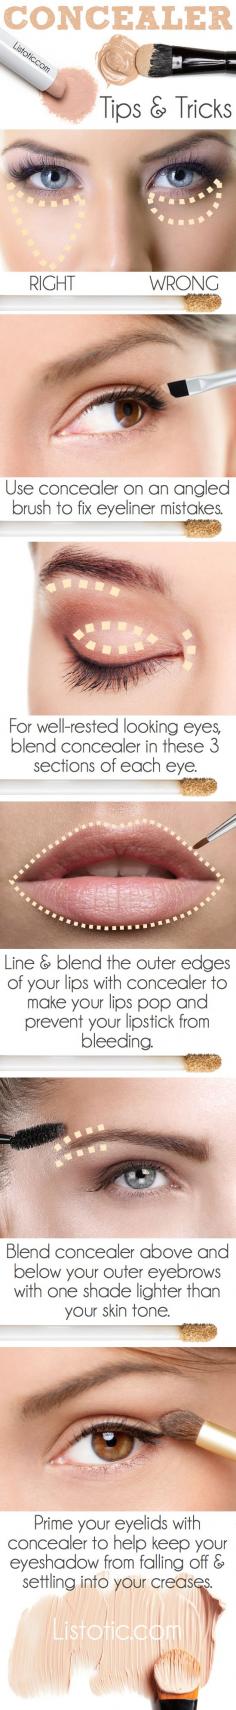 #1. Not knowing how to use your concealer | 20 Beauty Mistakes You Didn't Know You Were Making #makeup #tips #hair #foundation #howto